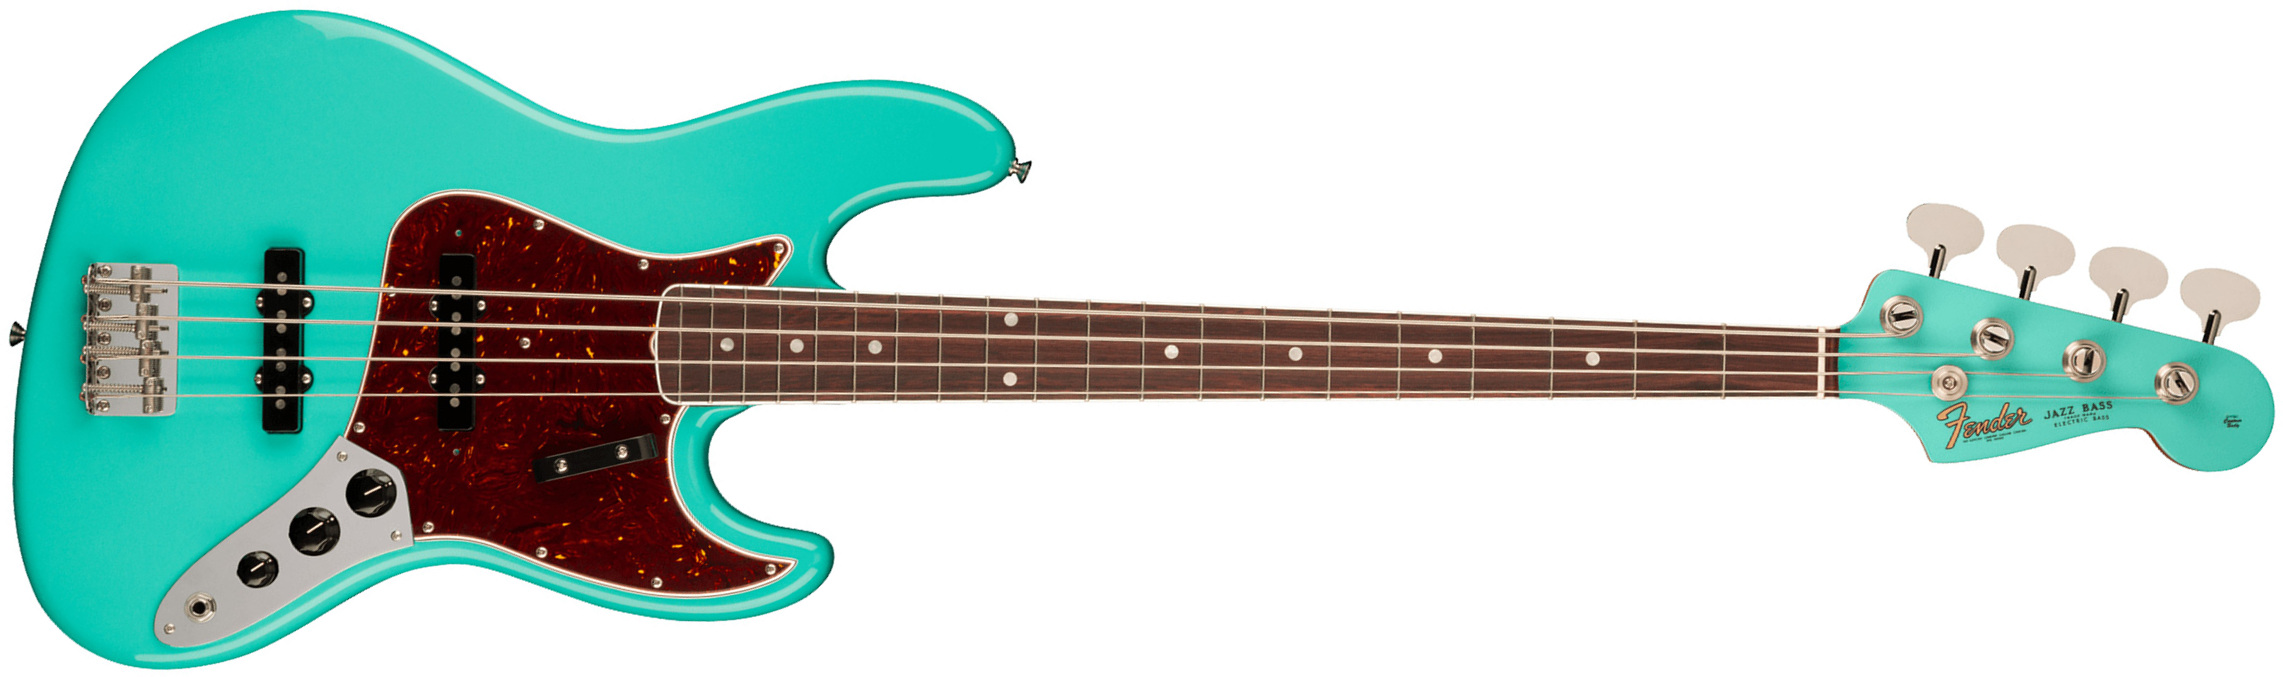 Fender Jazz Bass 1966 American Vintage Ii Usa Rw - Sea Foam Green - Basse Électrique Solid Body - Main picture